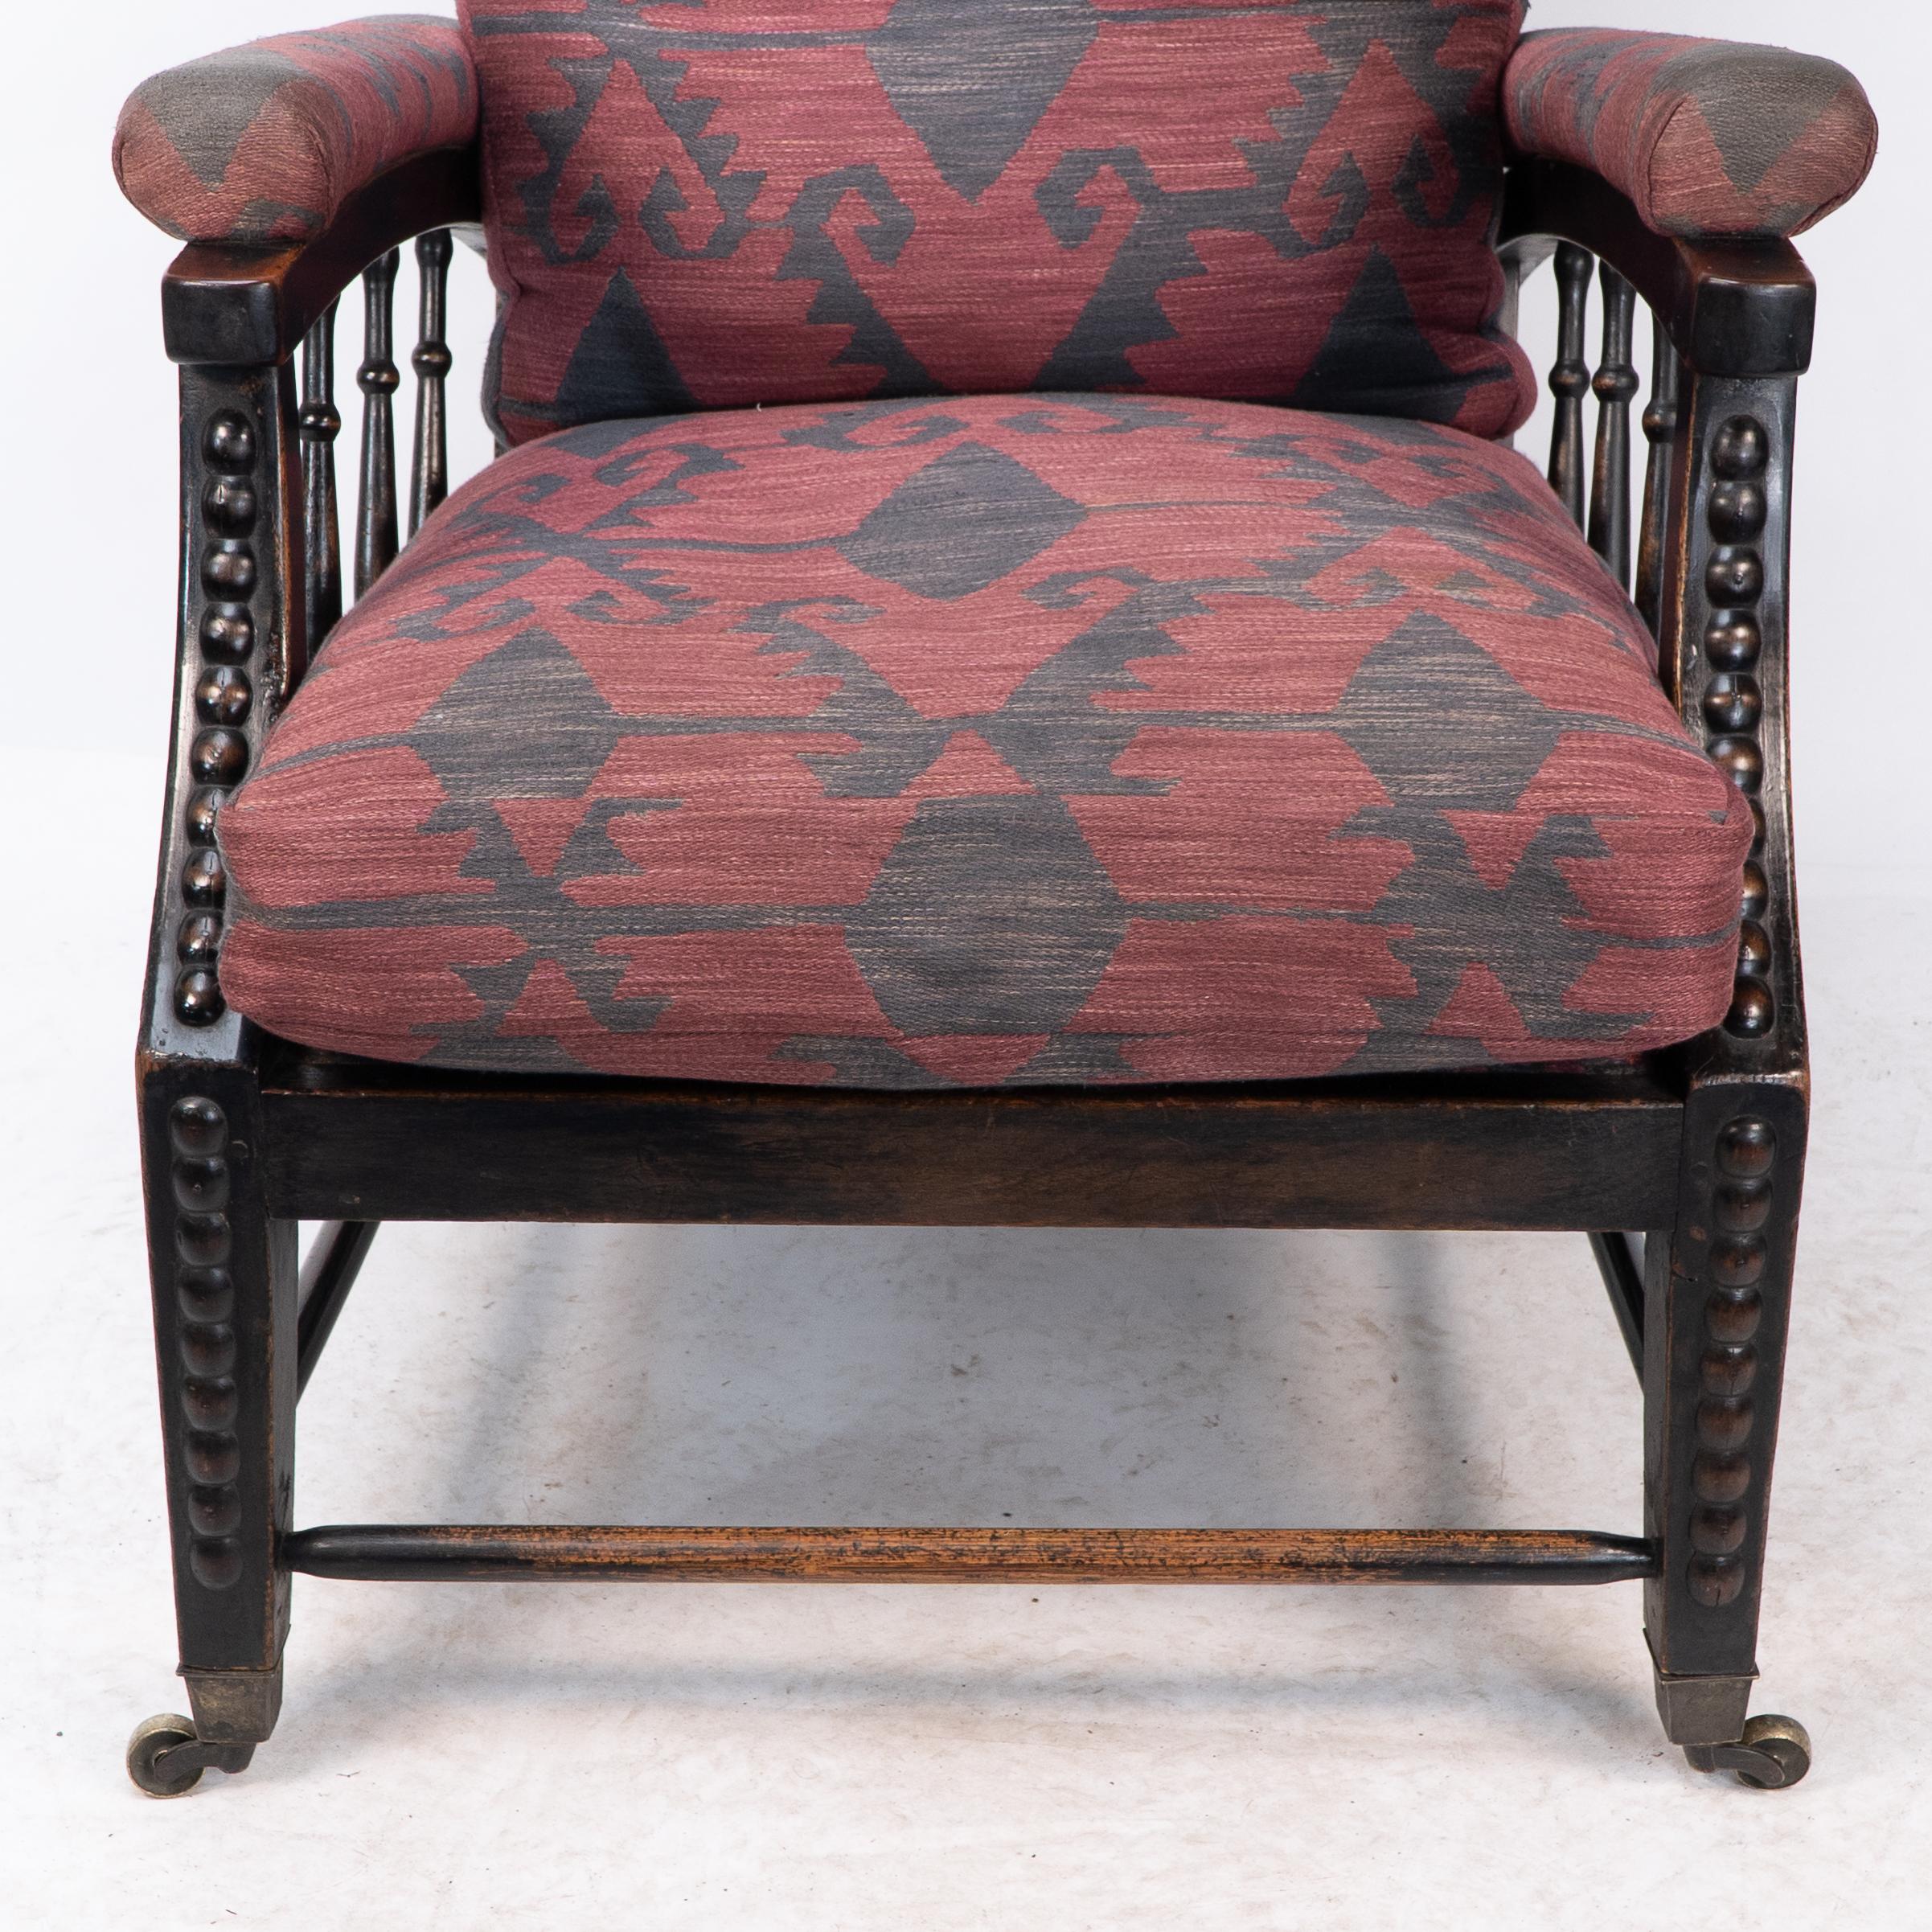 Walnut Phillip Webb for Morris & Co. an English Aesthetic Movement Reclining Armchair For Sale